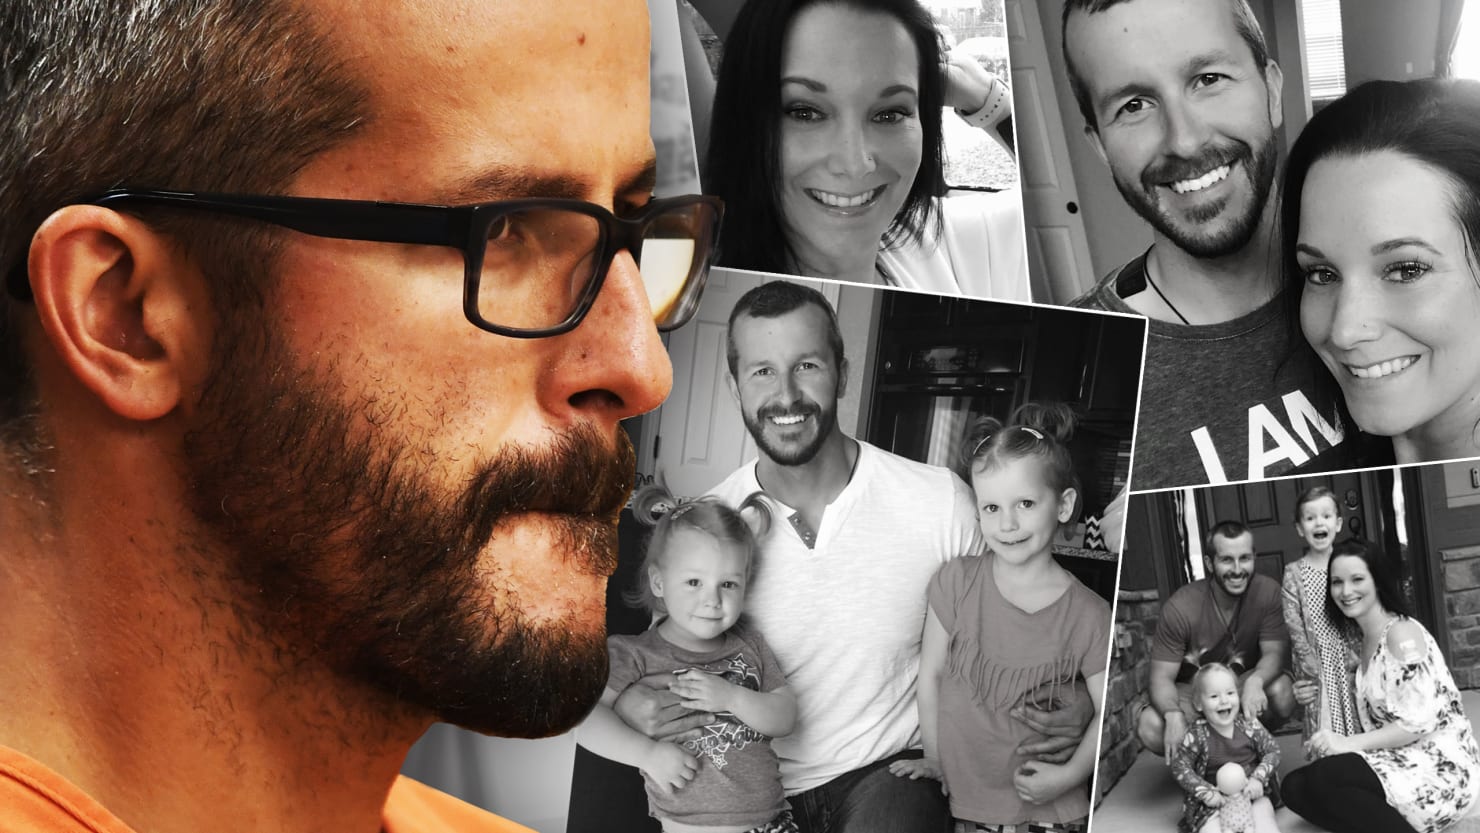 ‘Everyone Liked Him’: Did Colorado Dad Chris Watts Lead a Double Life?